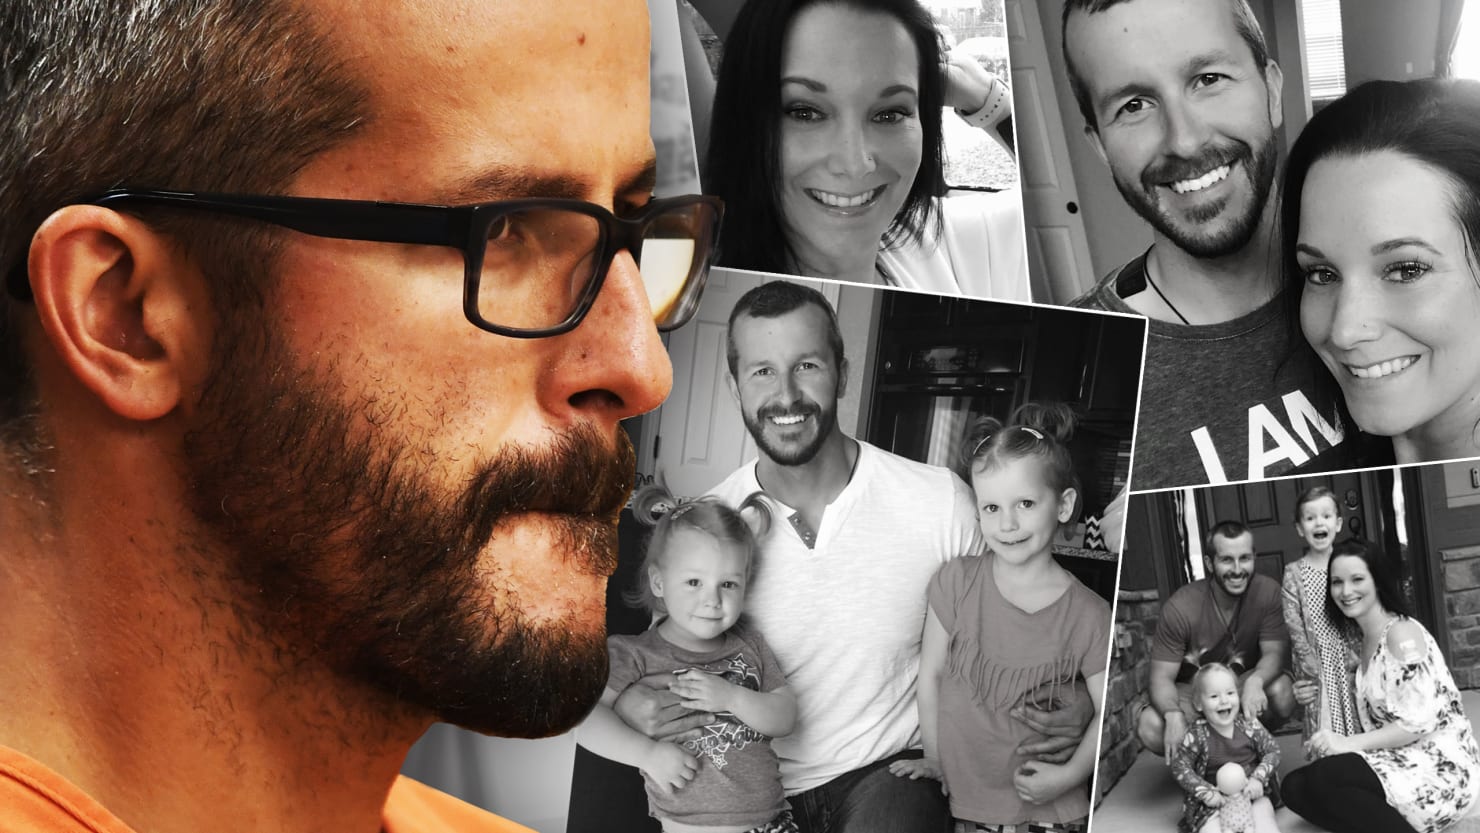 ‘Everyone Liked Him’: Did Colorado Dad Chris Watts Lead a Double Life?